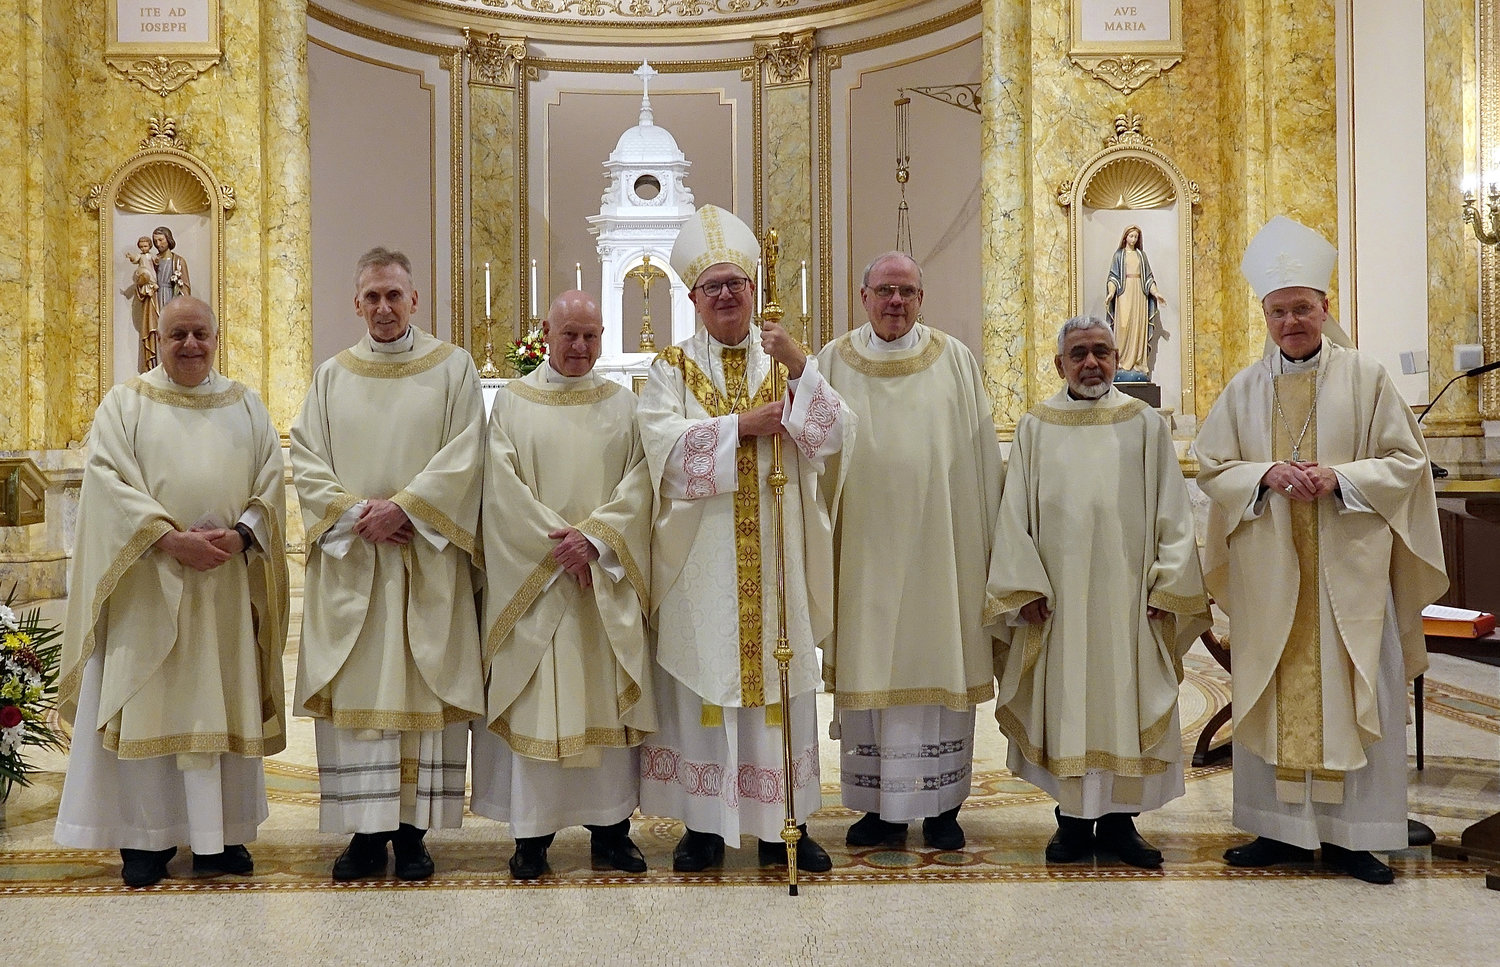 Members of the Ordination Class of 1971 join Cardinal Dolan, center, and Msgr. Joseph LaMorte, vicar general and moderator of the curia, left, and Auxiliary Bishop Edmund Whalen, vicar for clergy, right. From left, the jubilarians are Father Kevin Madigan, Msgr. Robert Ritchie, Msgr. Dennis Keane and Father Gamini Fernando.